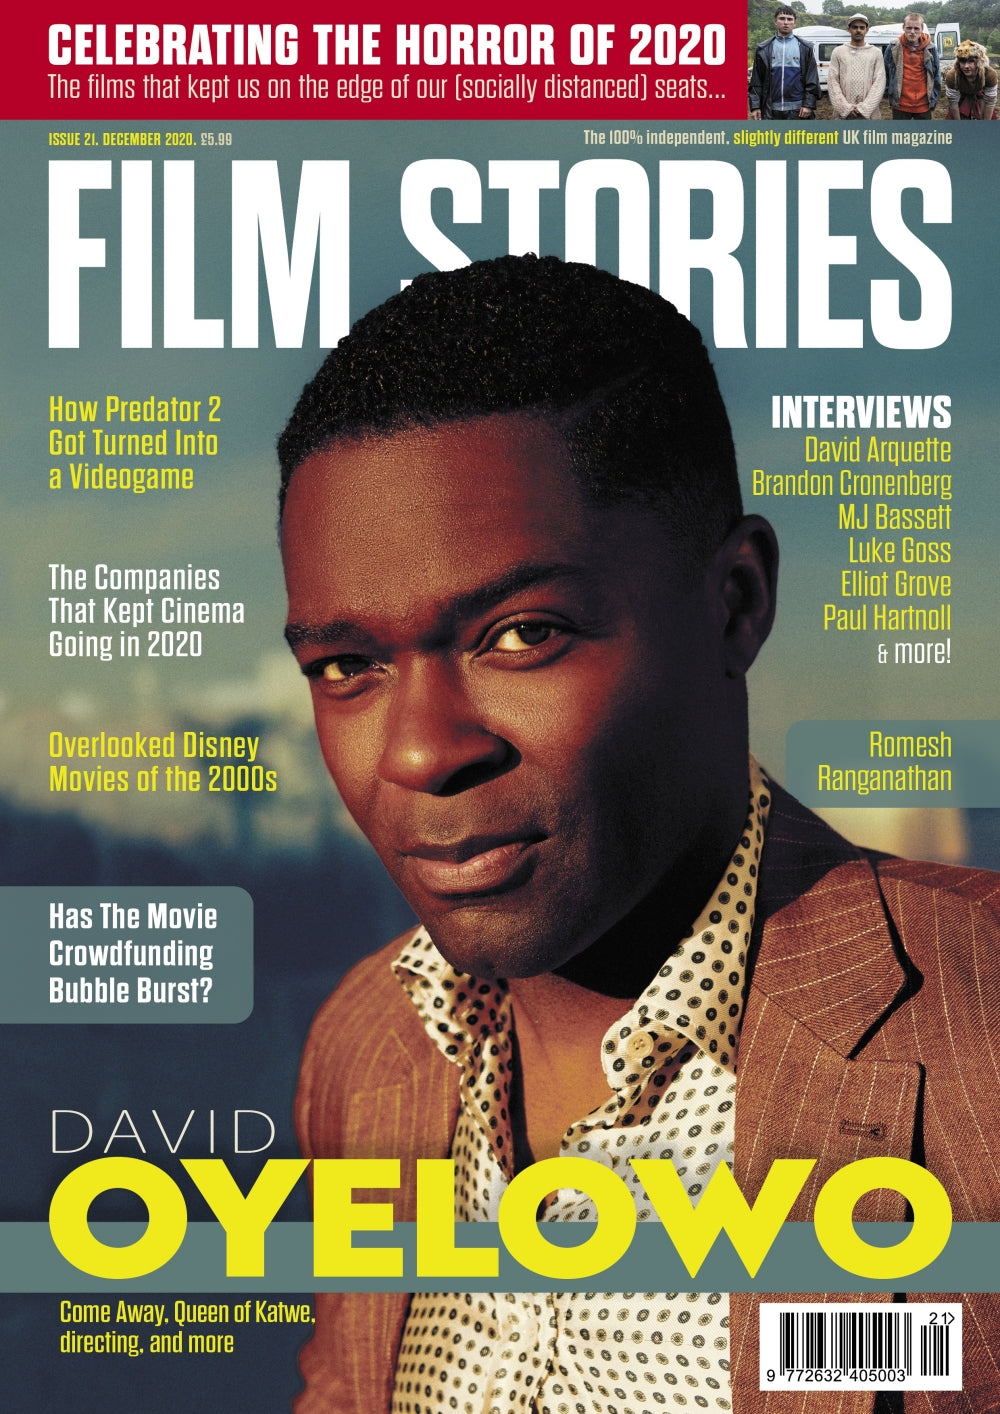 Film Stories issue 21 print edition (December 2020)